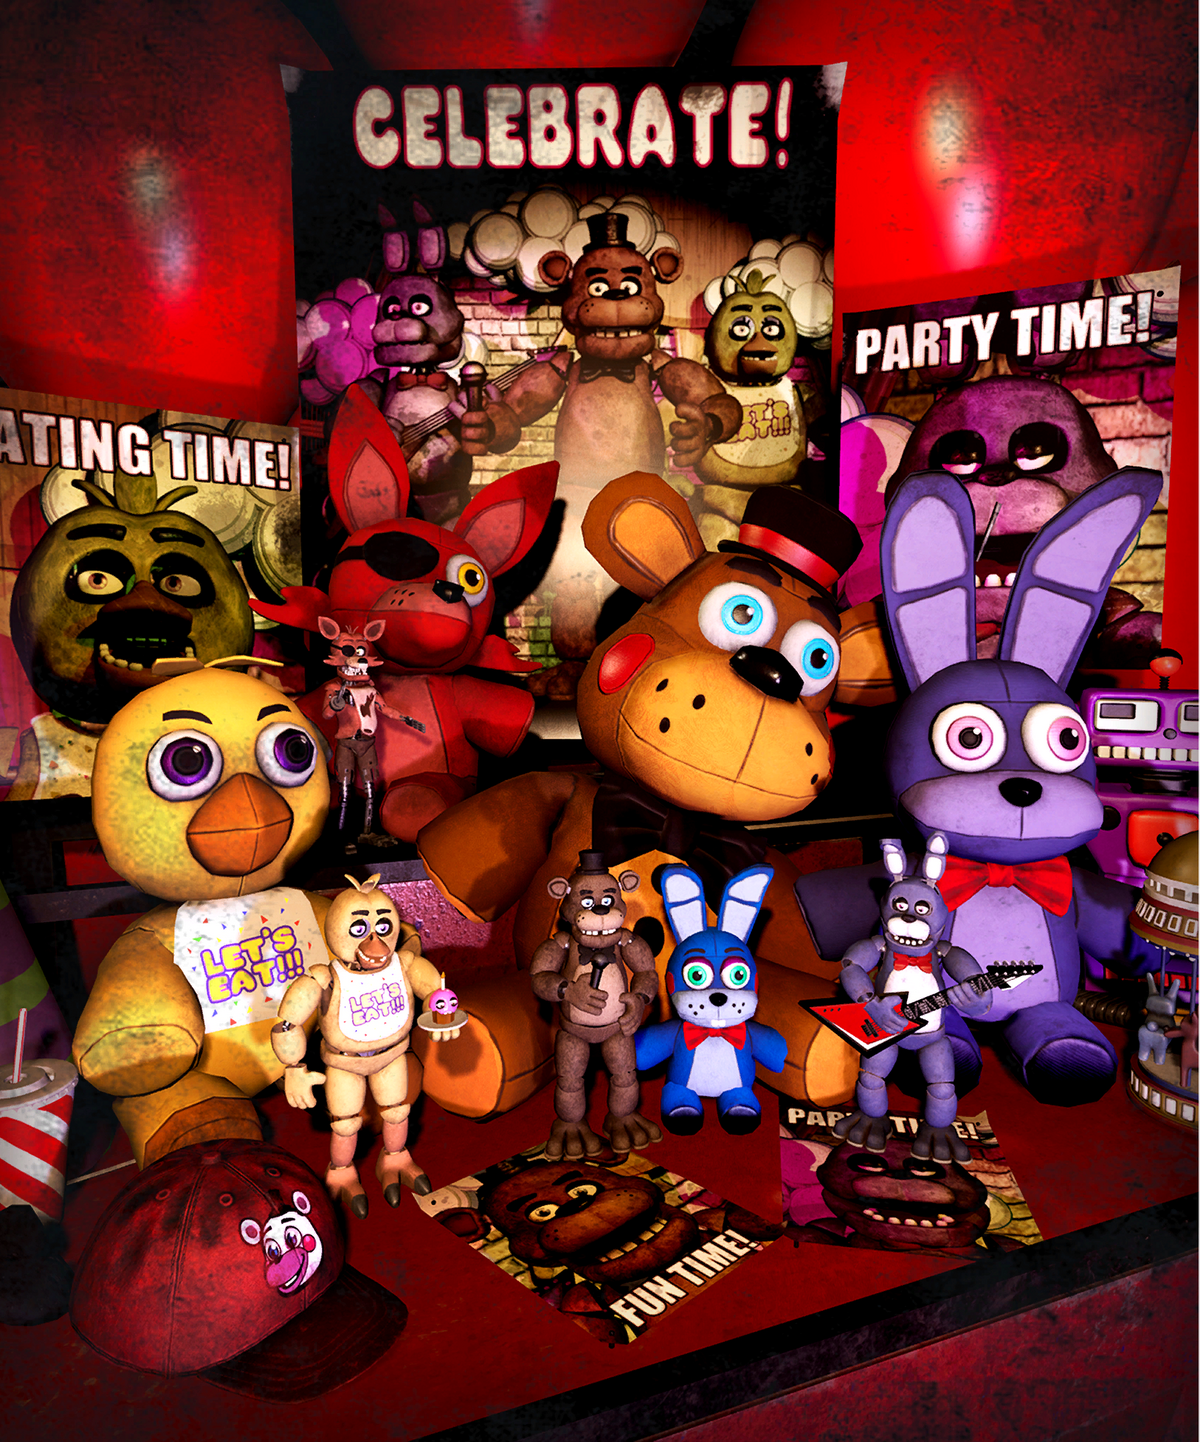 Available Now: GameStop Exclusive Five Nights at Freddy's Animatronic  Freddy & Foxy!